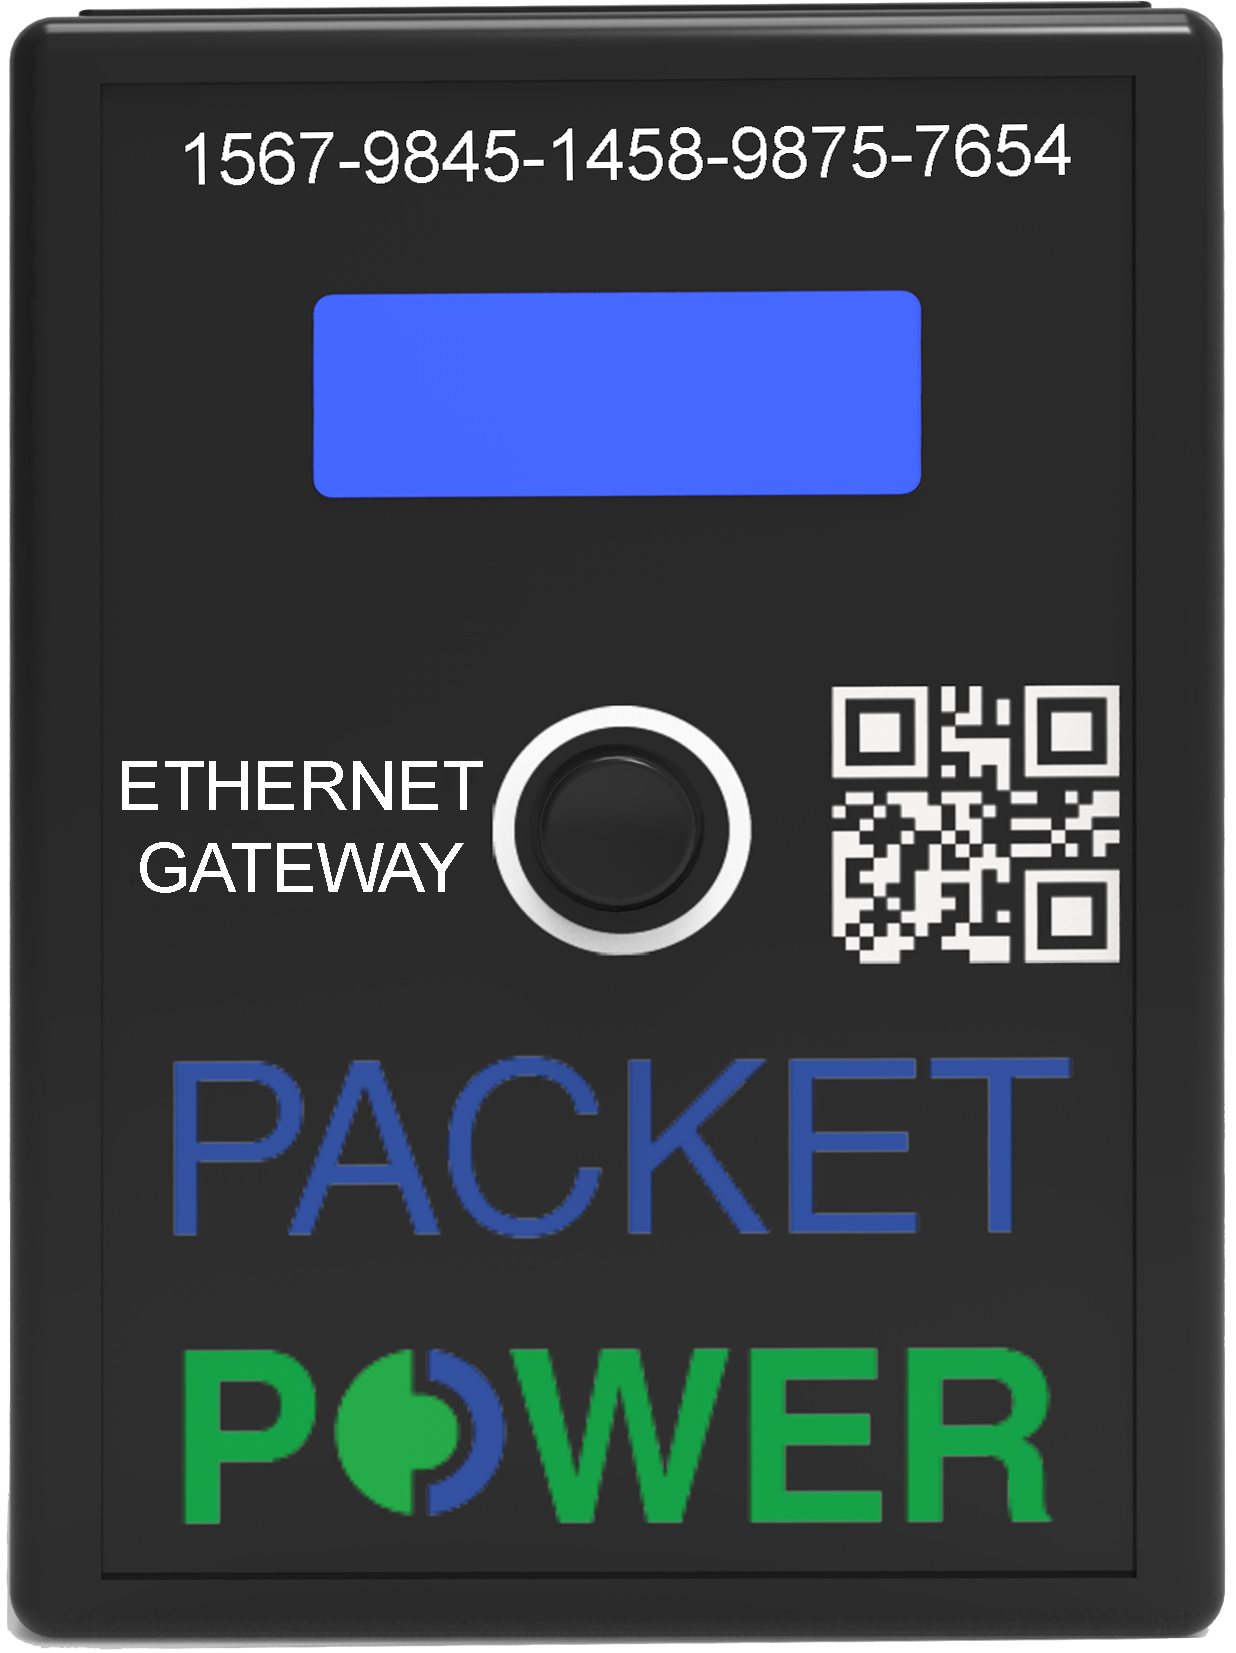 Ethernet Gateway Version 4 now available